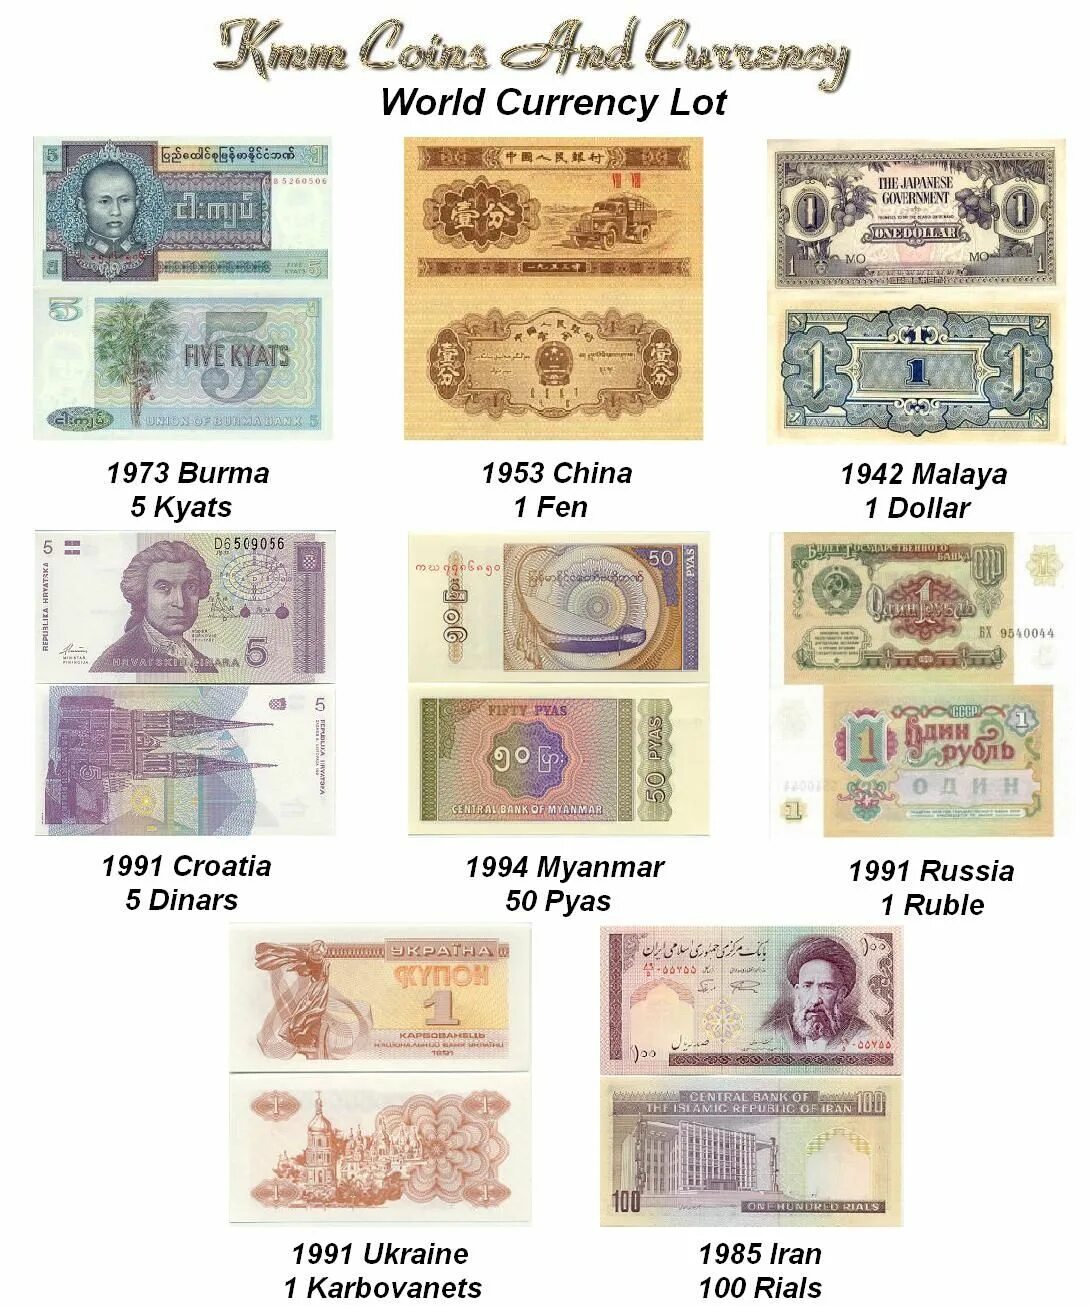 Name a currency. World currencies. Names of World currency. Currency from different Countries.